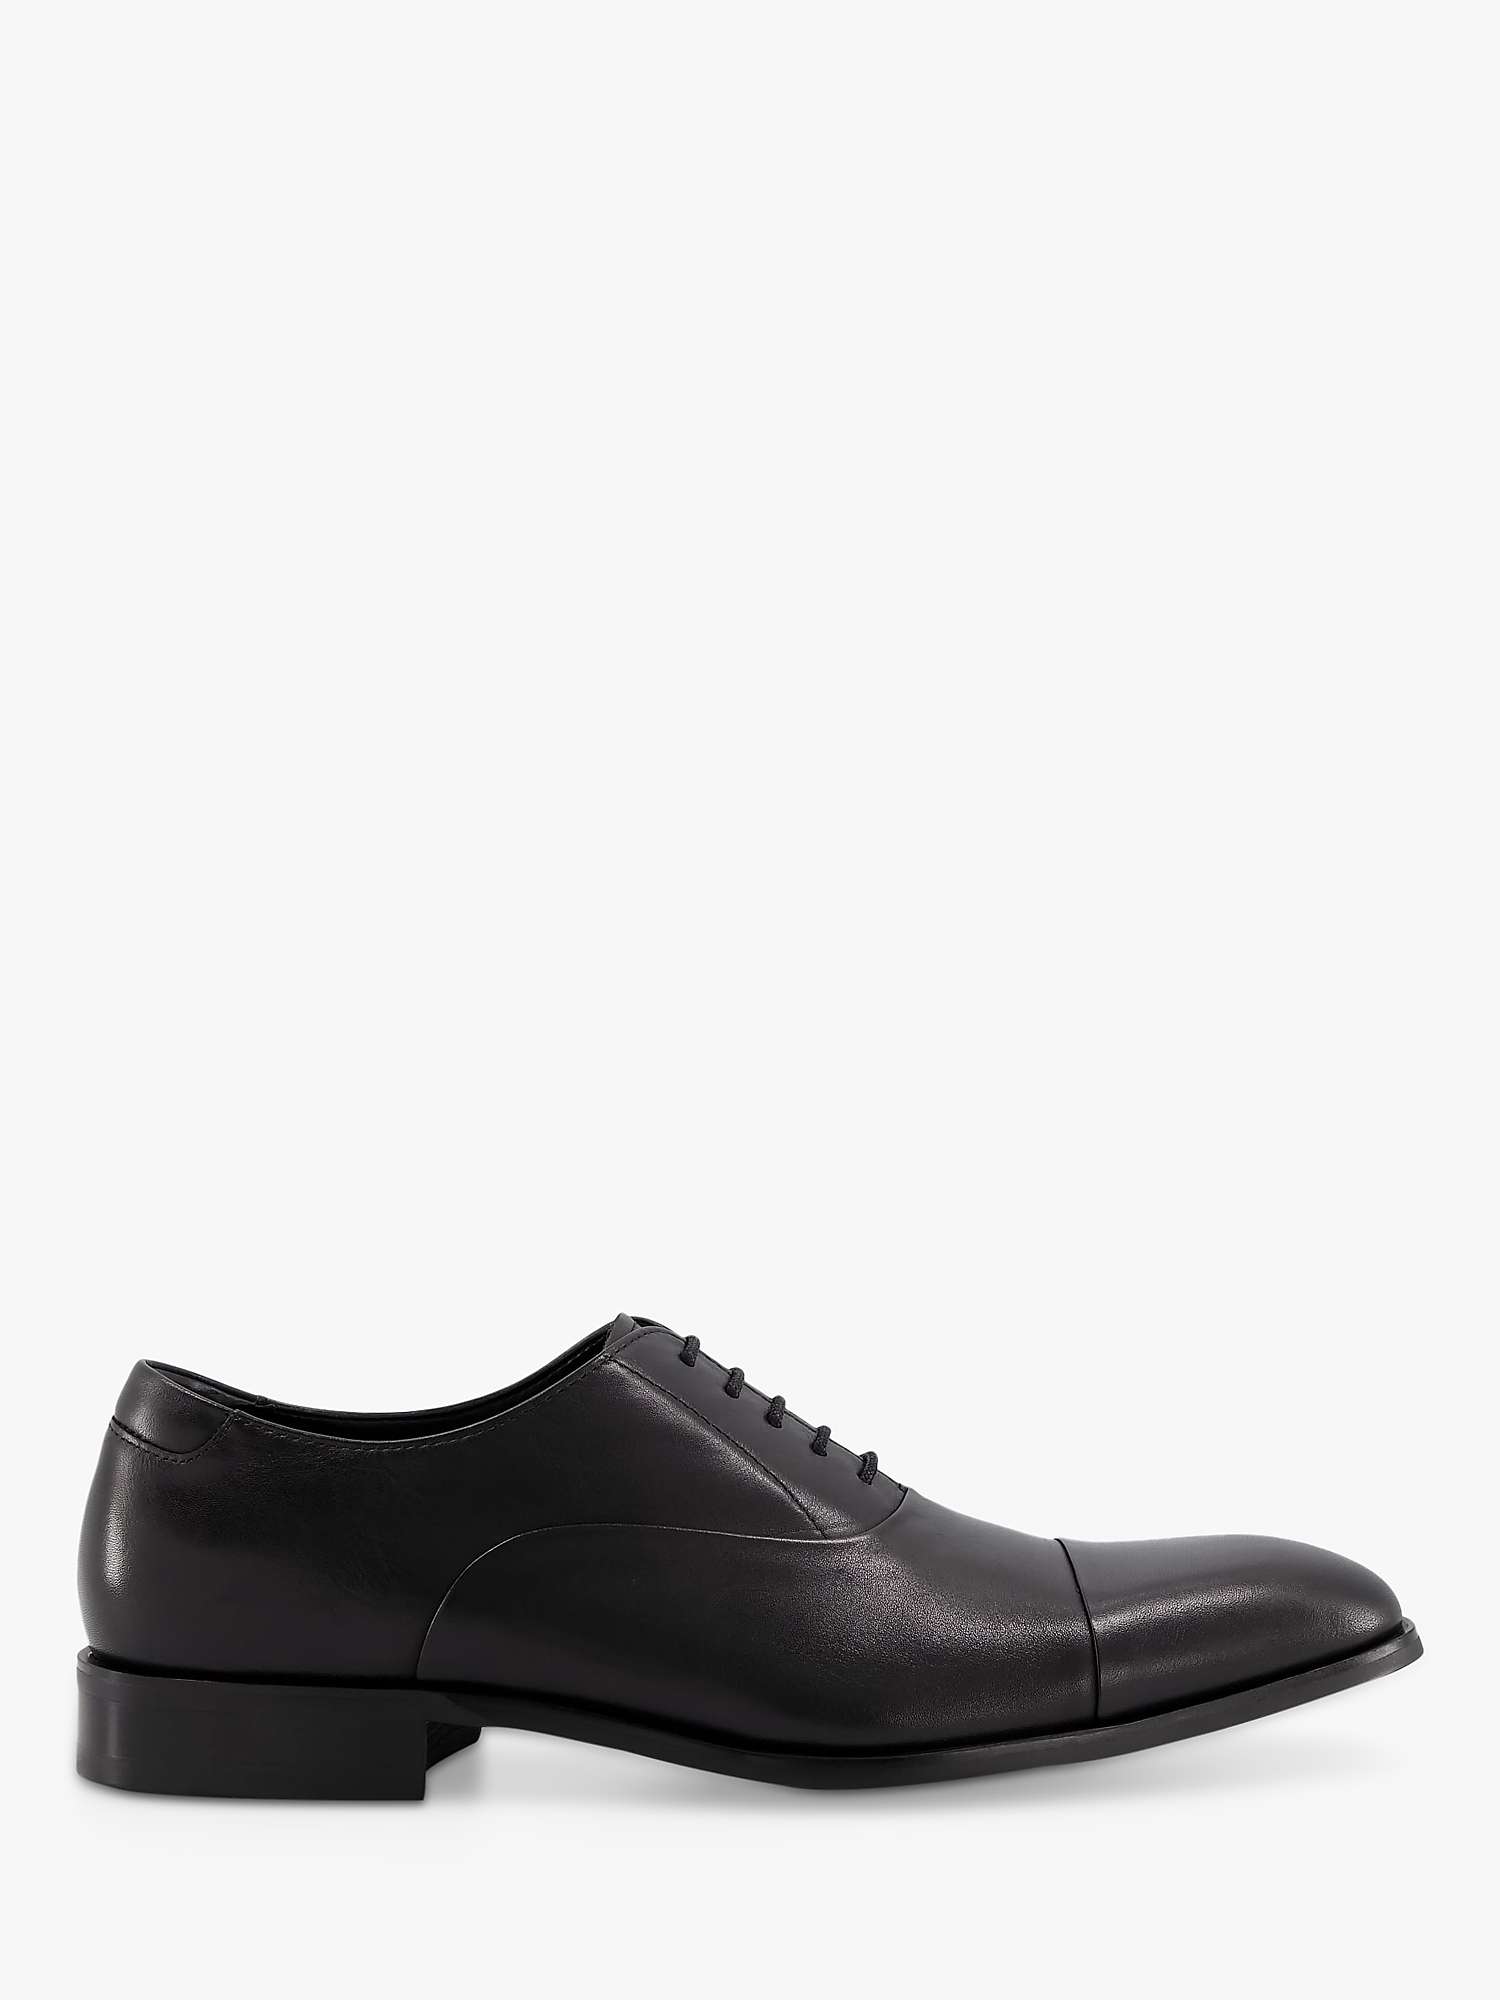 Buy Dune Wide Fit Secrecy Leather Derby Shoes, Black Online at johnlewis.com